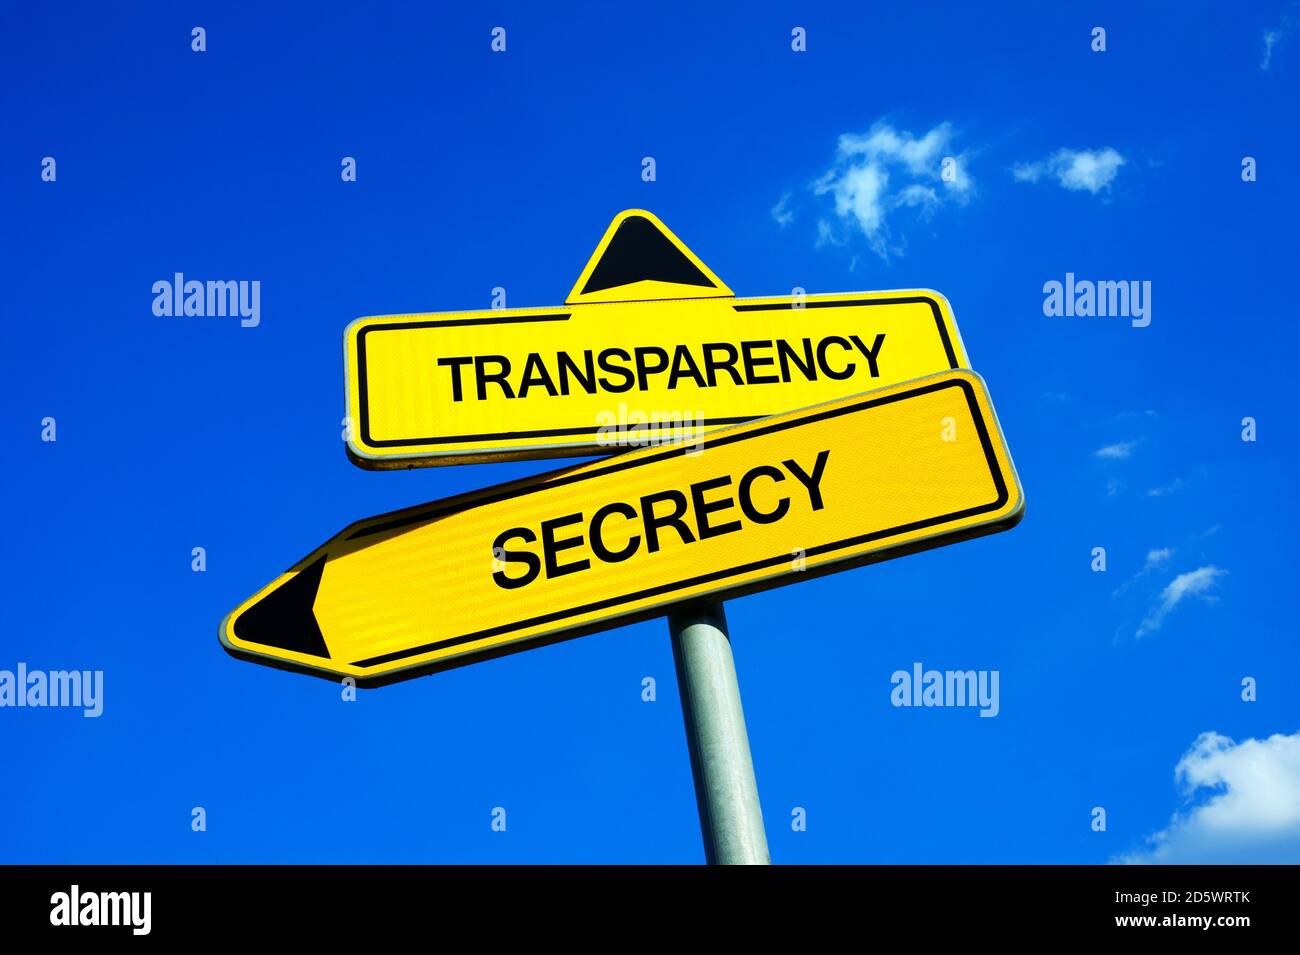 Transparency vs Secrecy - Traffic sign with two options - keeping secret about important information or be transparent. Prevention against corruption Stock Photo